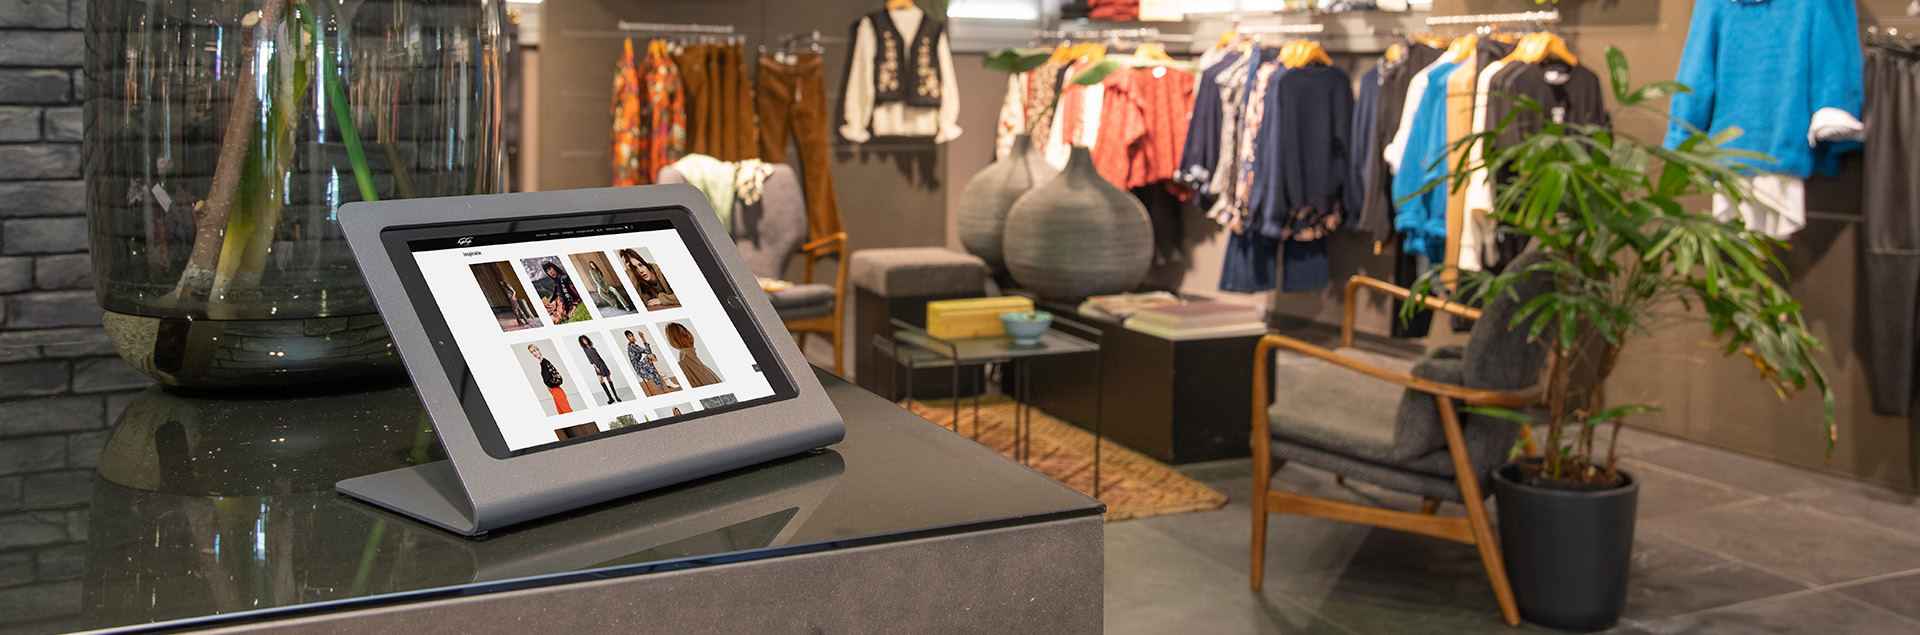 Tablets in retail